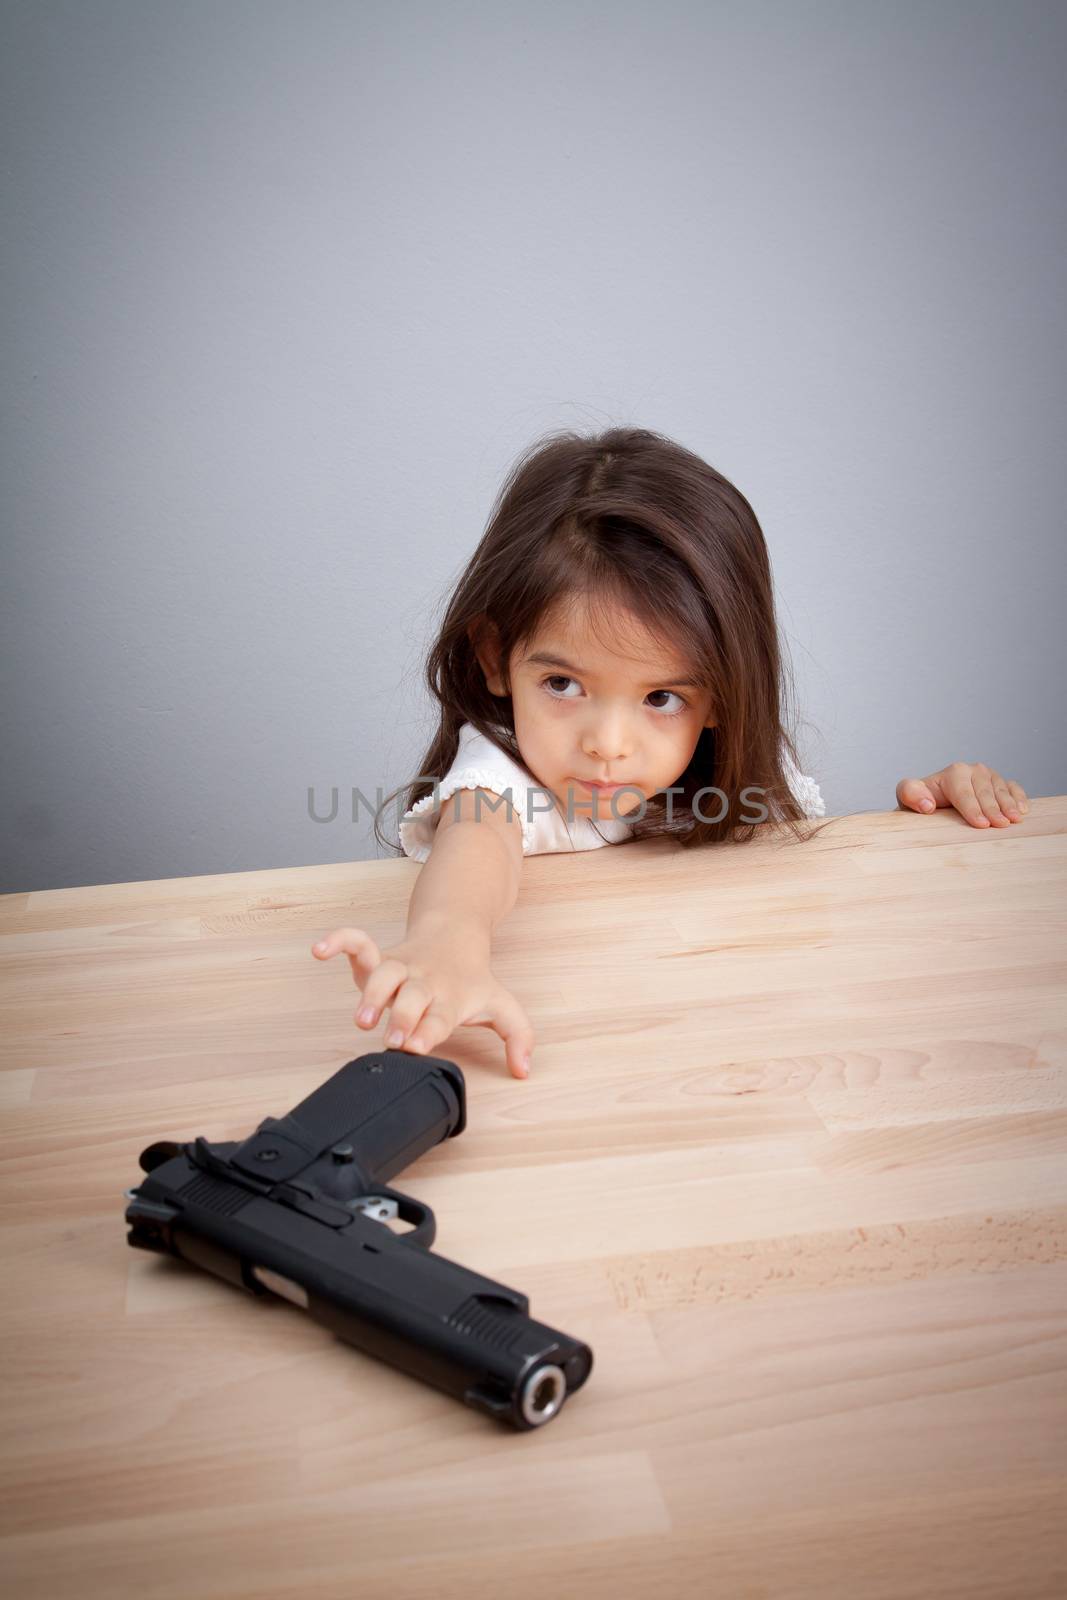 parents not keep gun in safe place, children can have gun for accident. safety concept by asiandelight